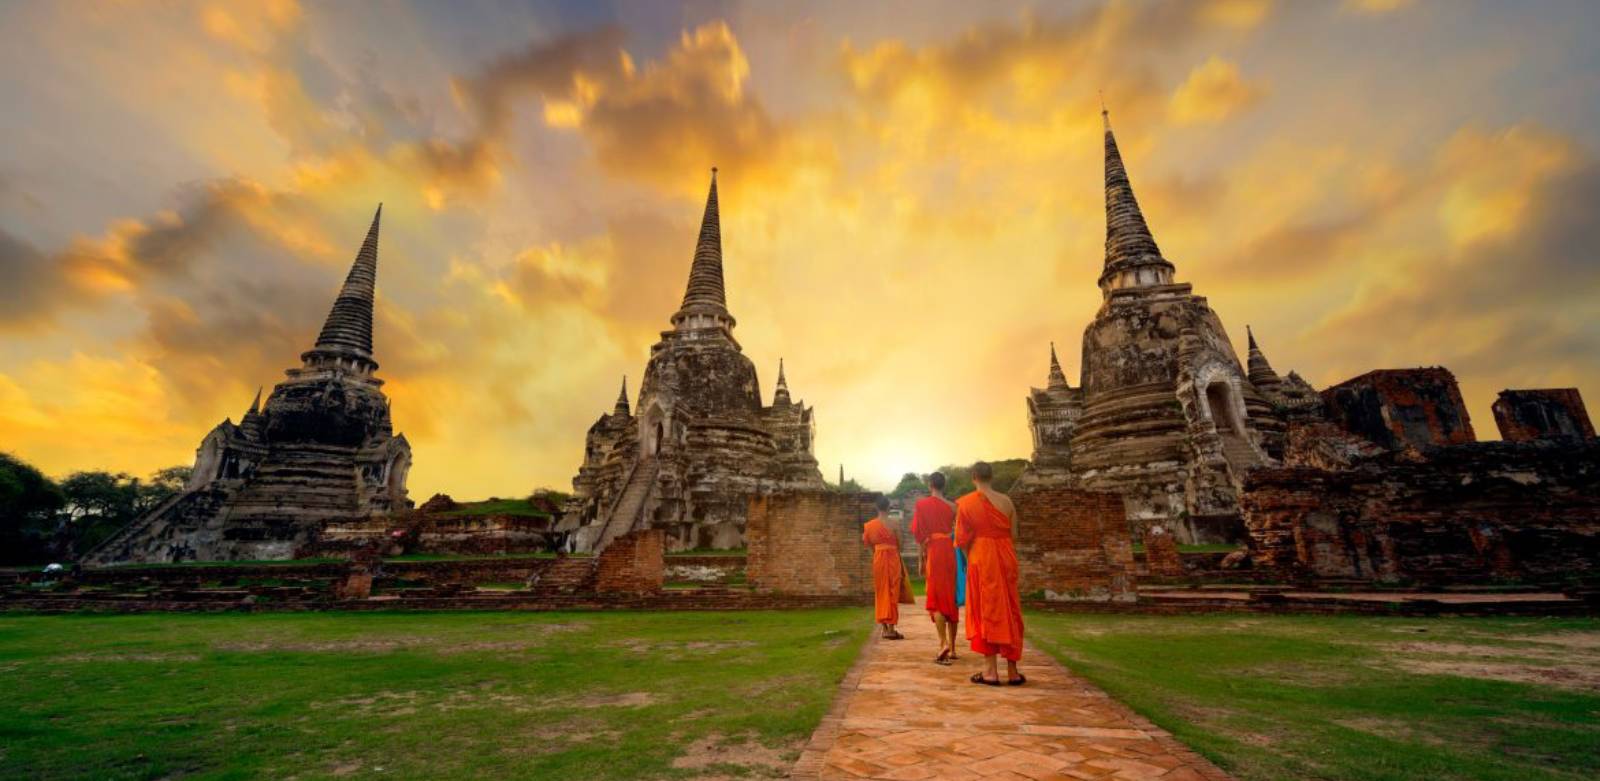 Laos featured in Australian travel publication among best places to visit in 2023